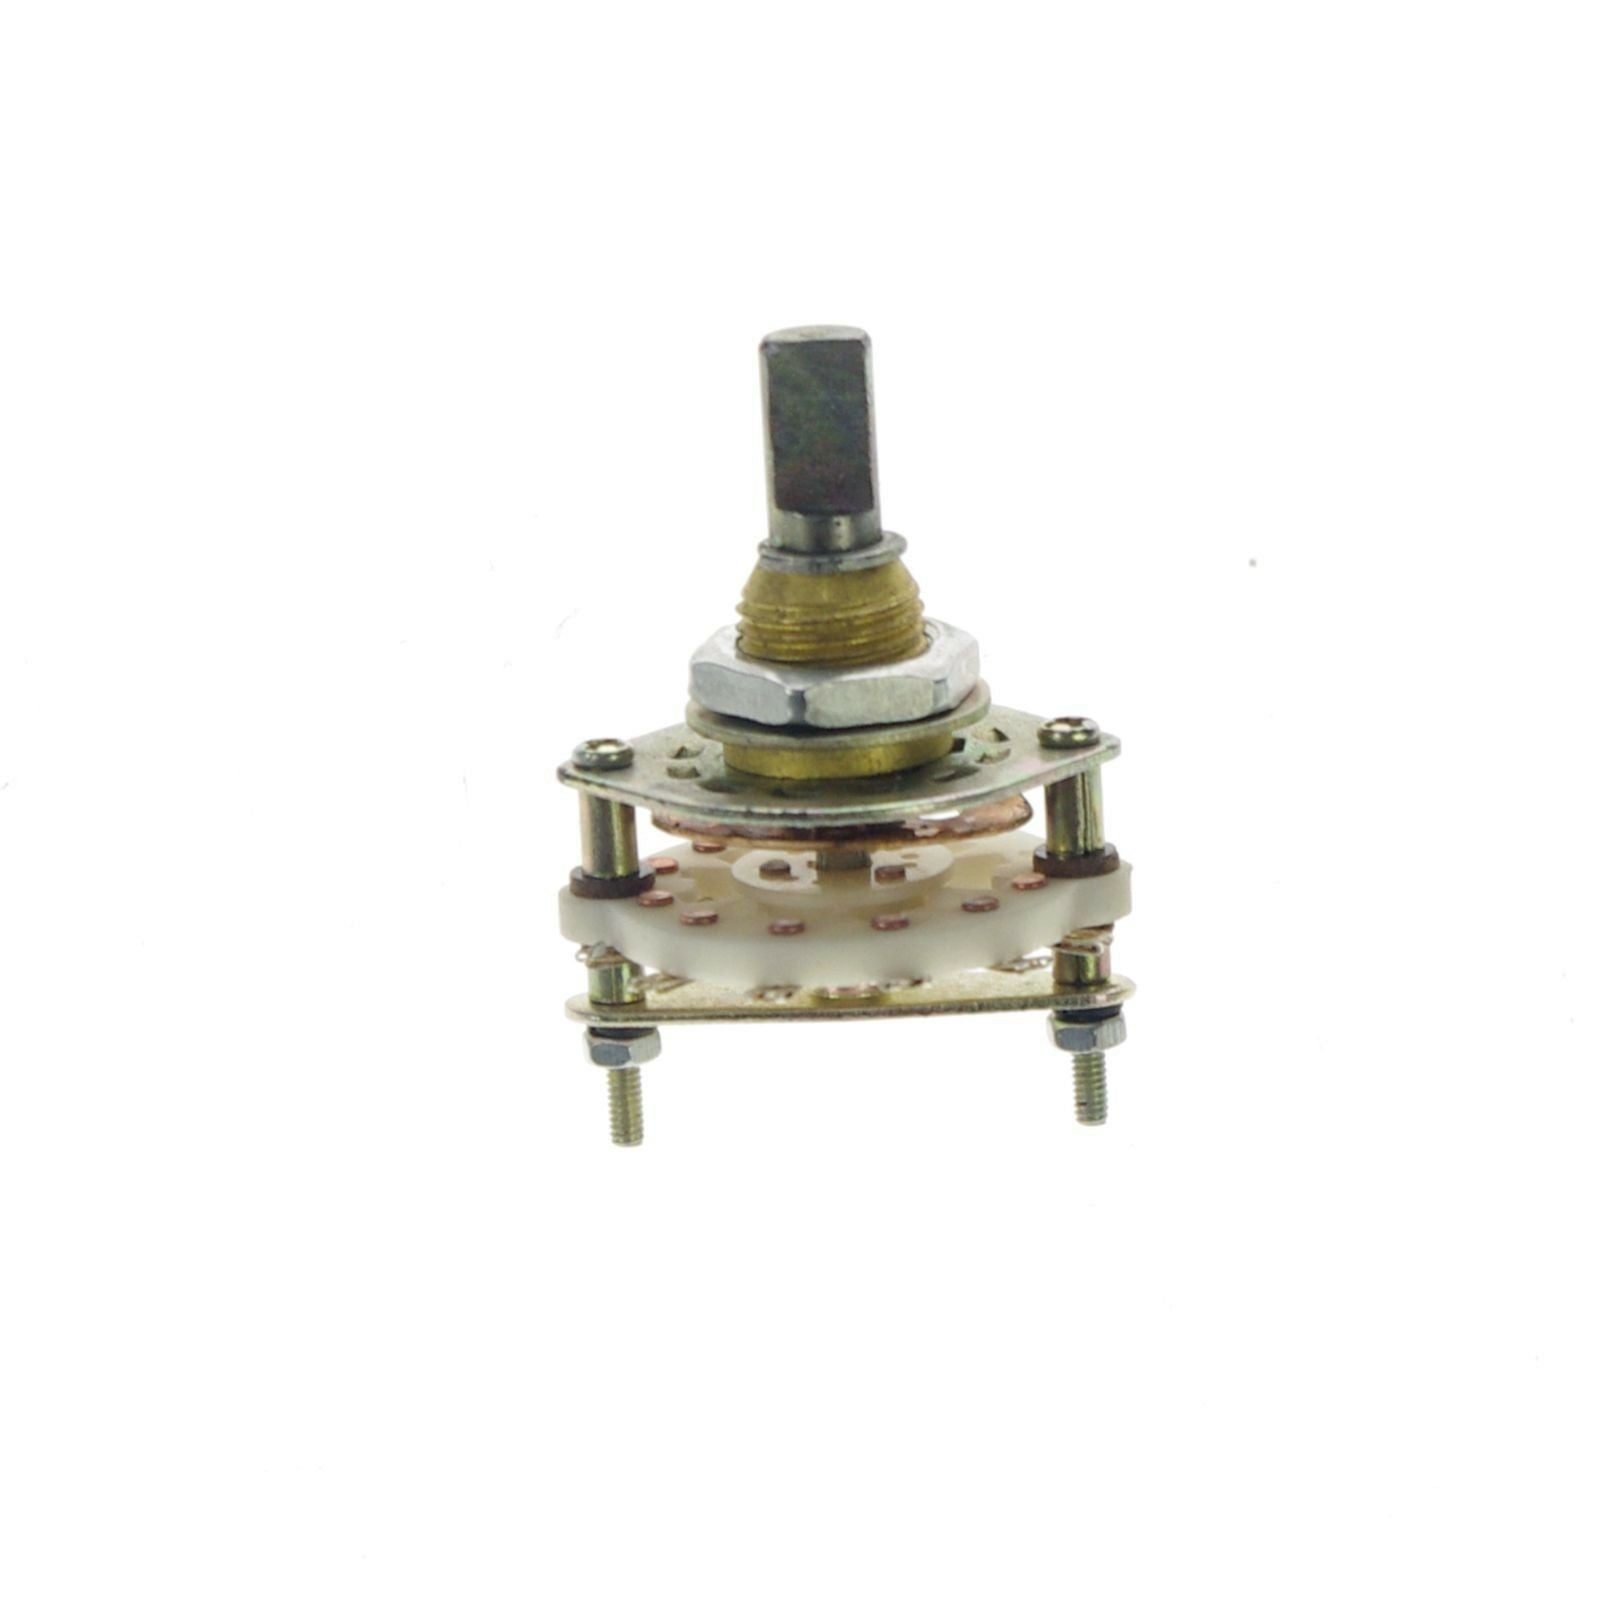 (1)2 contact 3 positions Wave-band Rotary Switch 1 Deck Ceramic Rotate 2 times